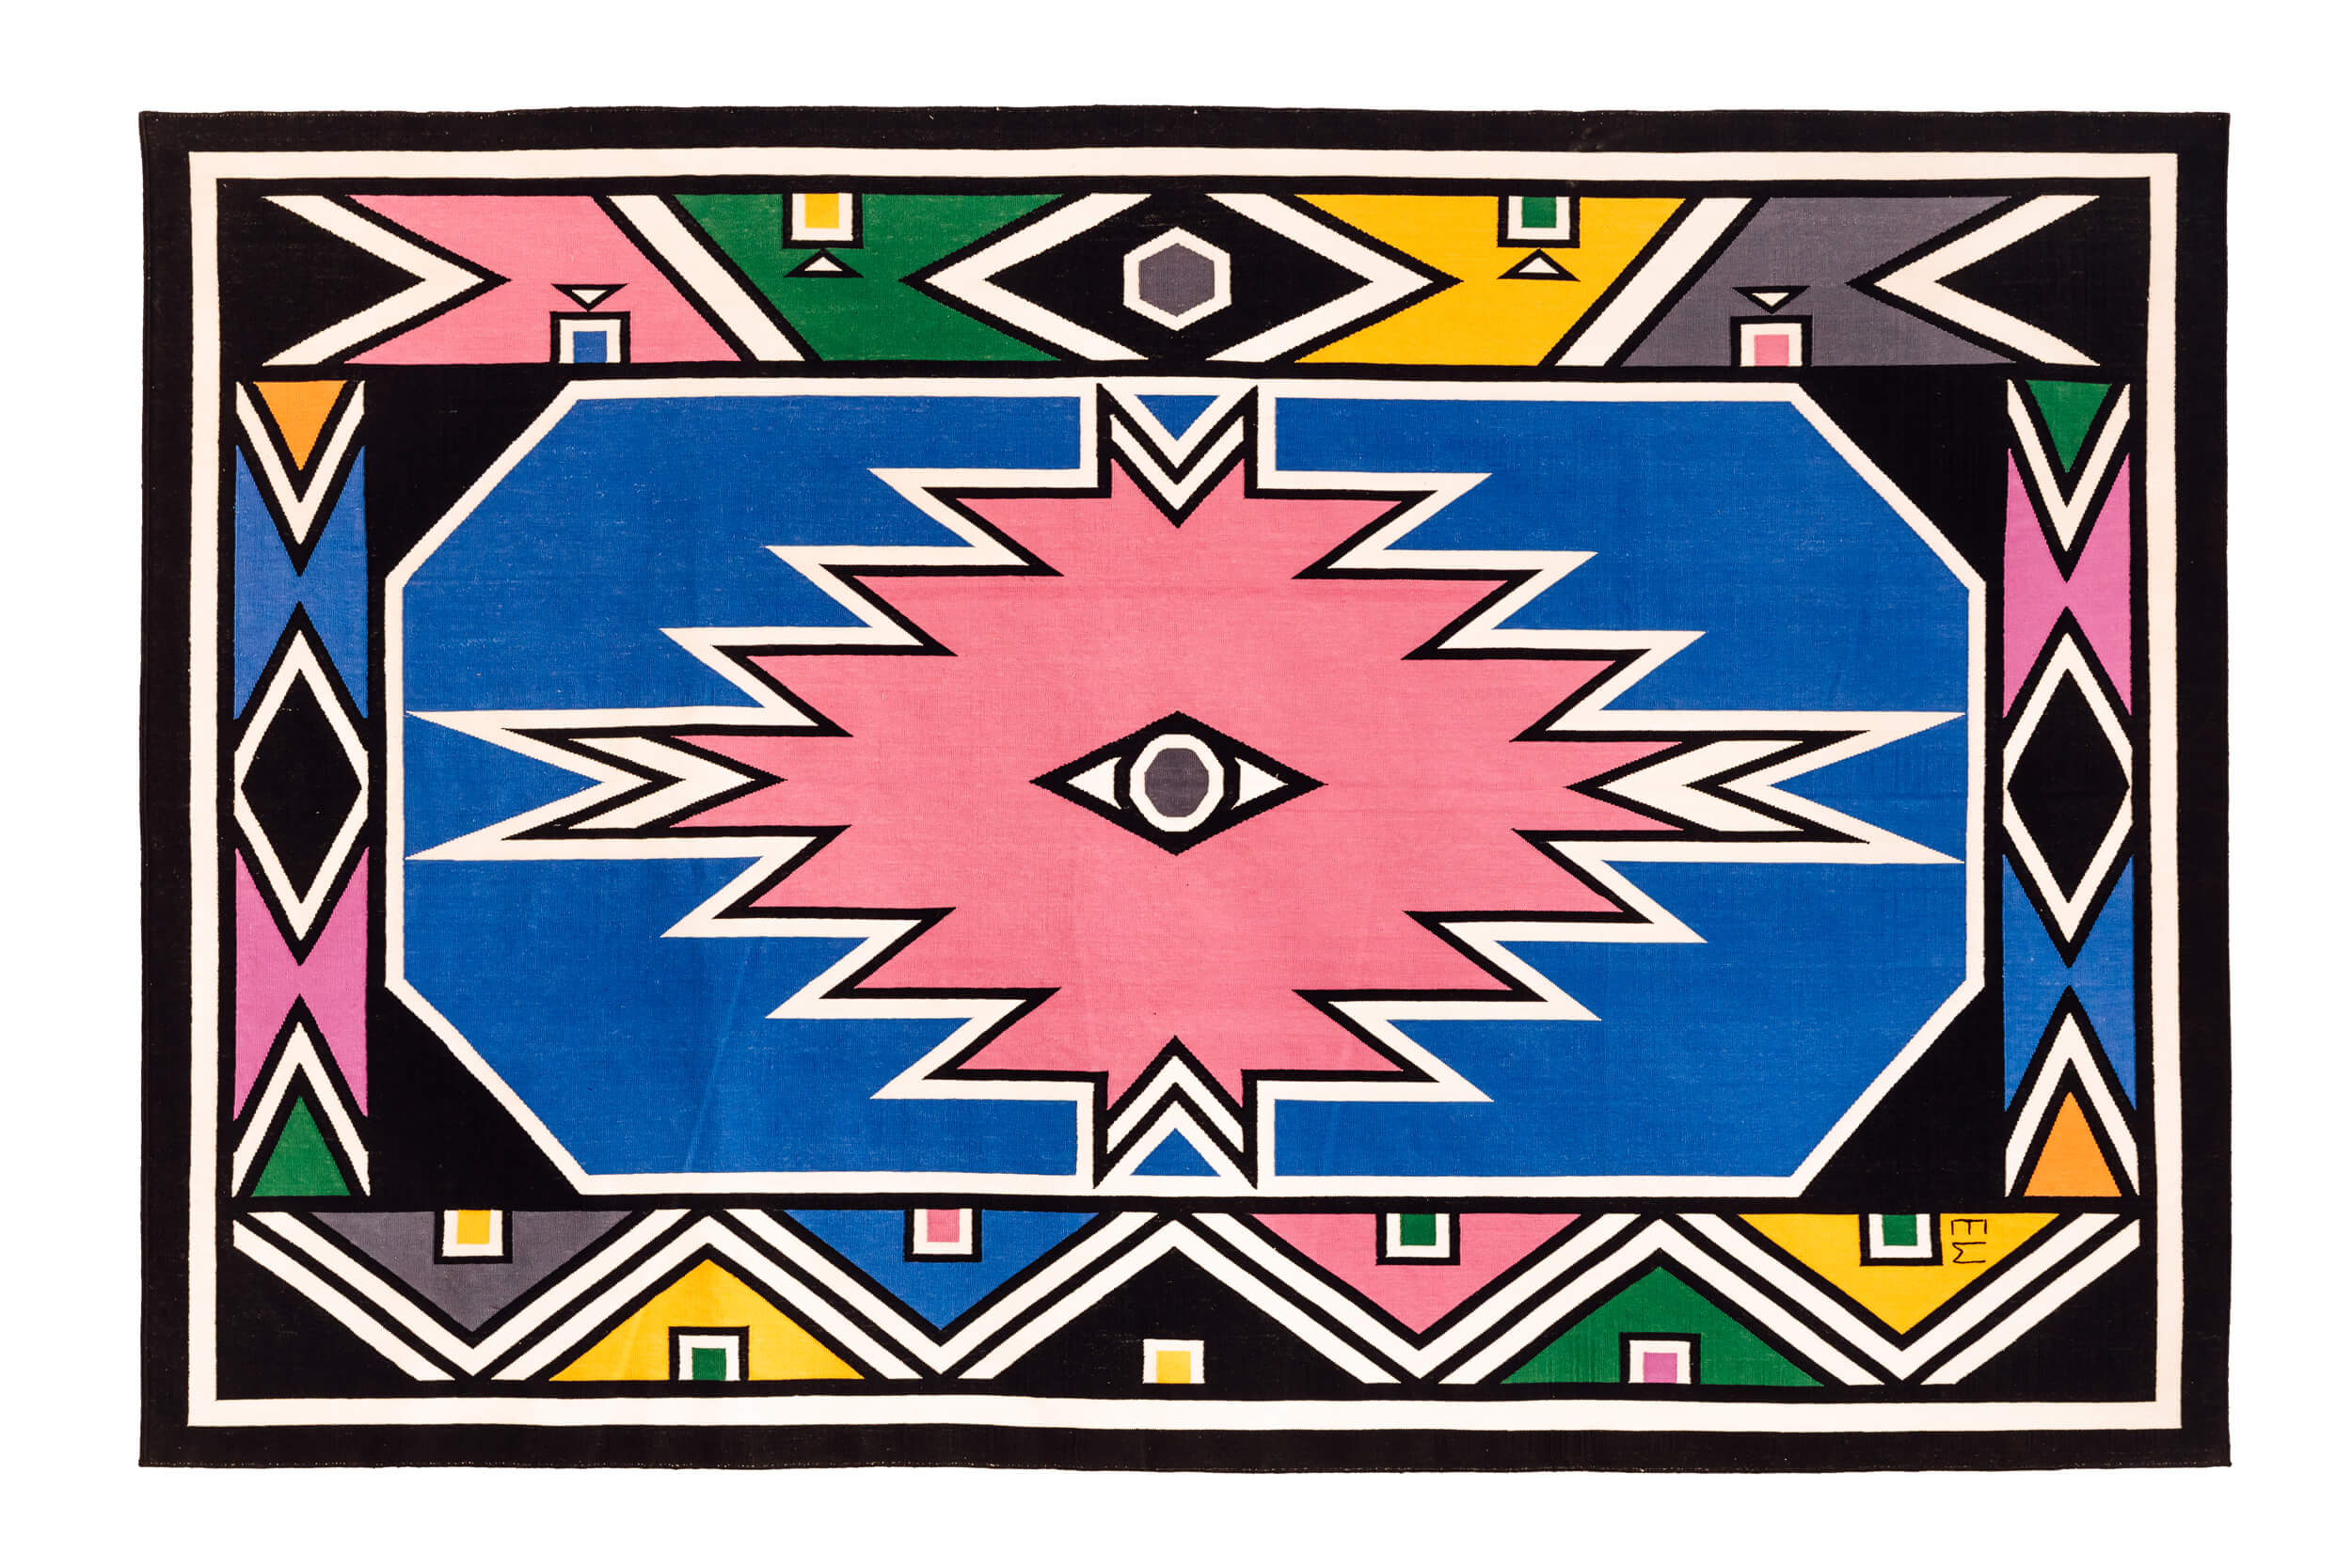 Esther Mahlangu's Home in South Africa